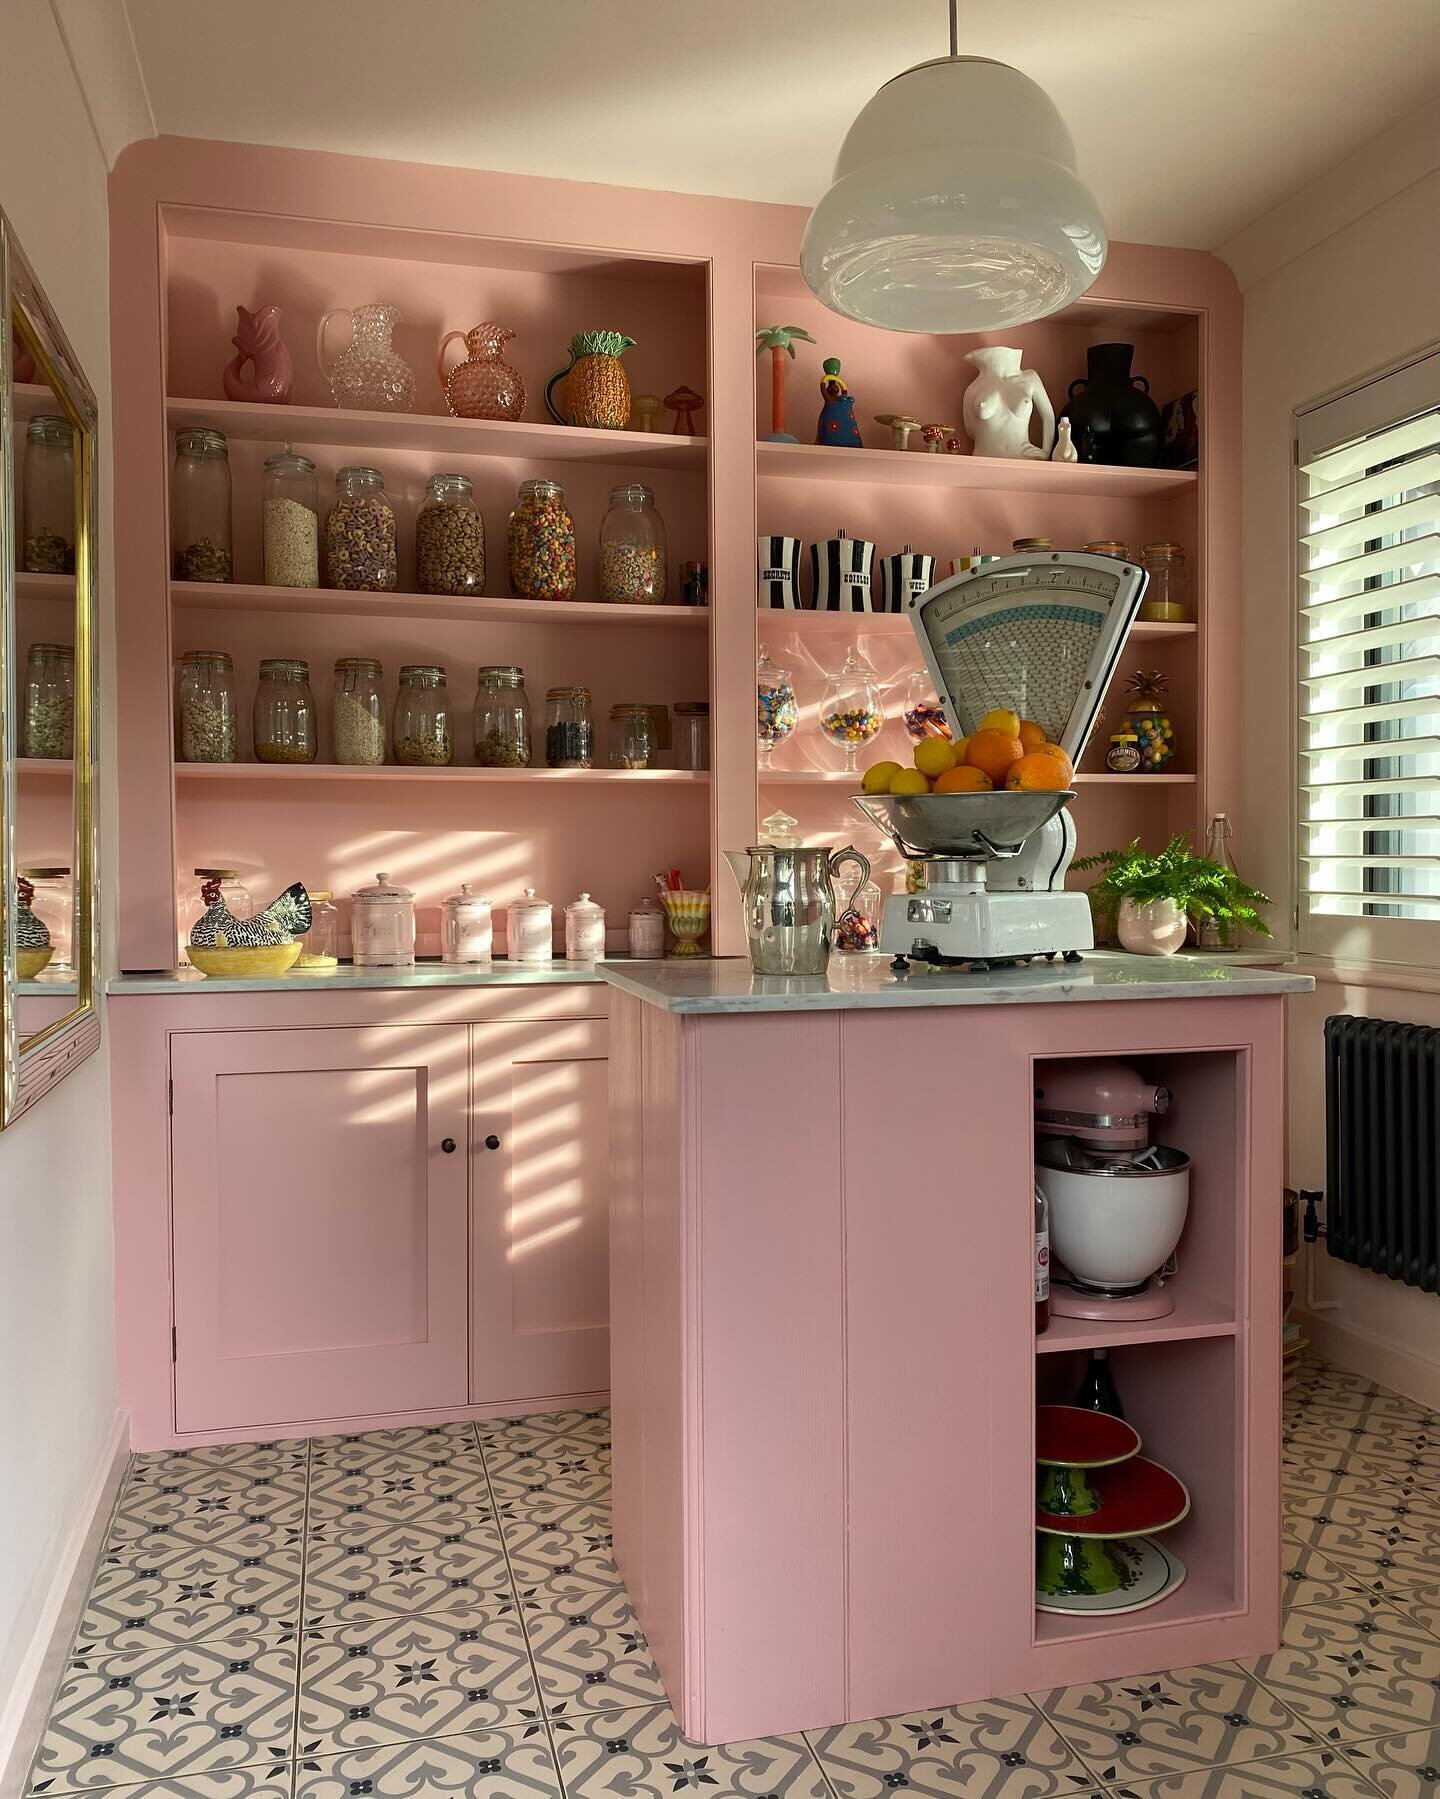 Colour like no other. Pink pantry, kitchen island and french doors. At the home of @emmajonesconsultancy 
Hertfordshire.
The original maker.
&bull;
&bull;
&bull;
#theoriginalmaker #kitchen #pantry #doors #home #interiordesign #kitchenisland #colour #